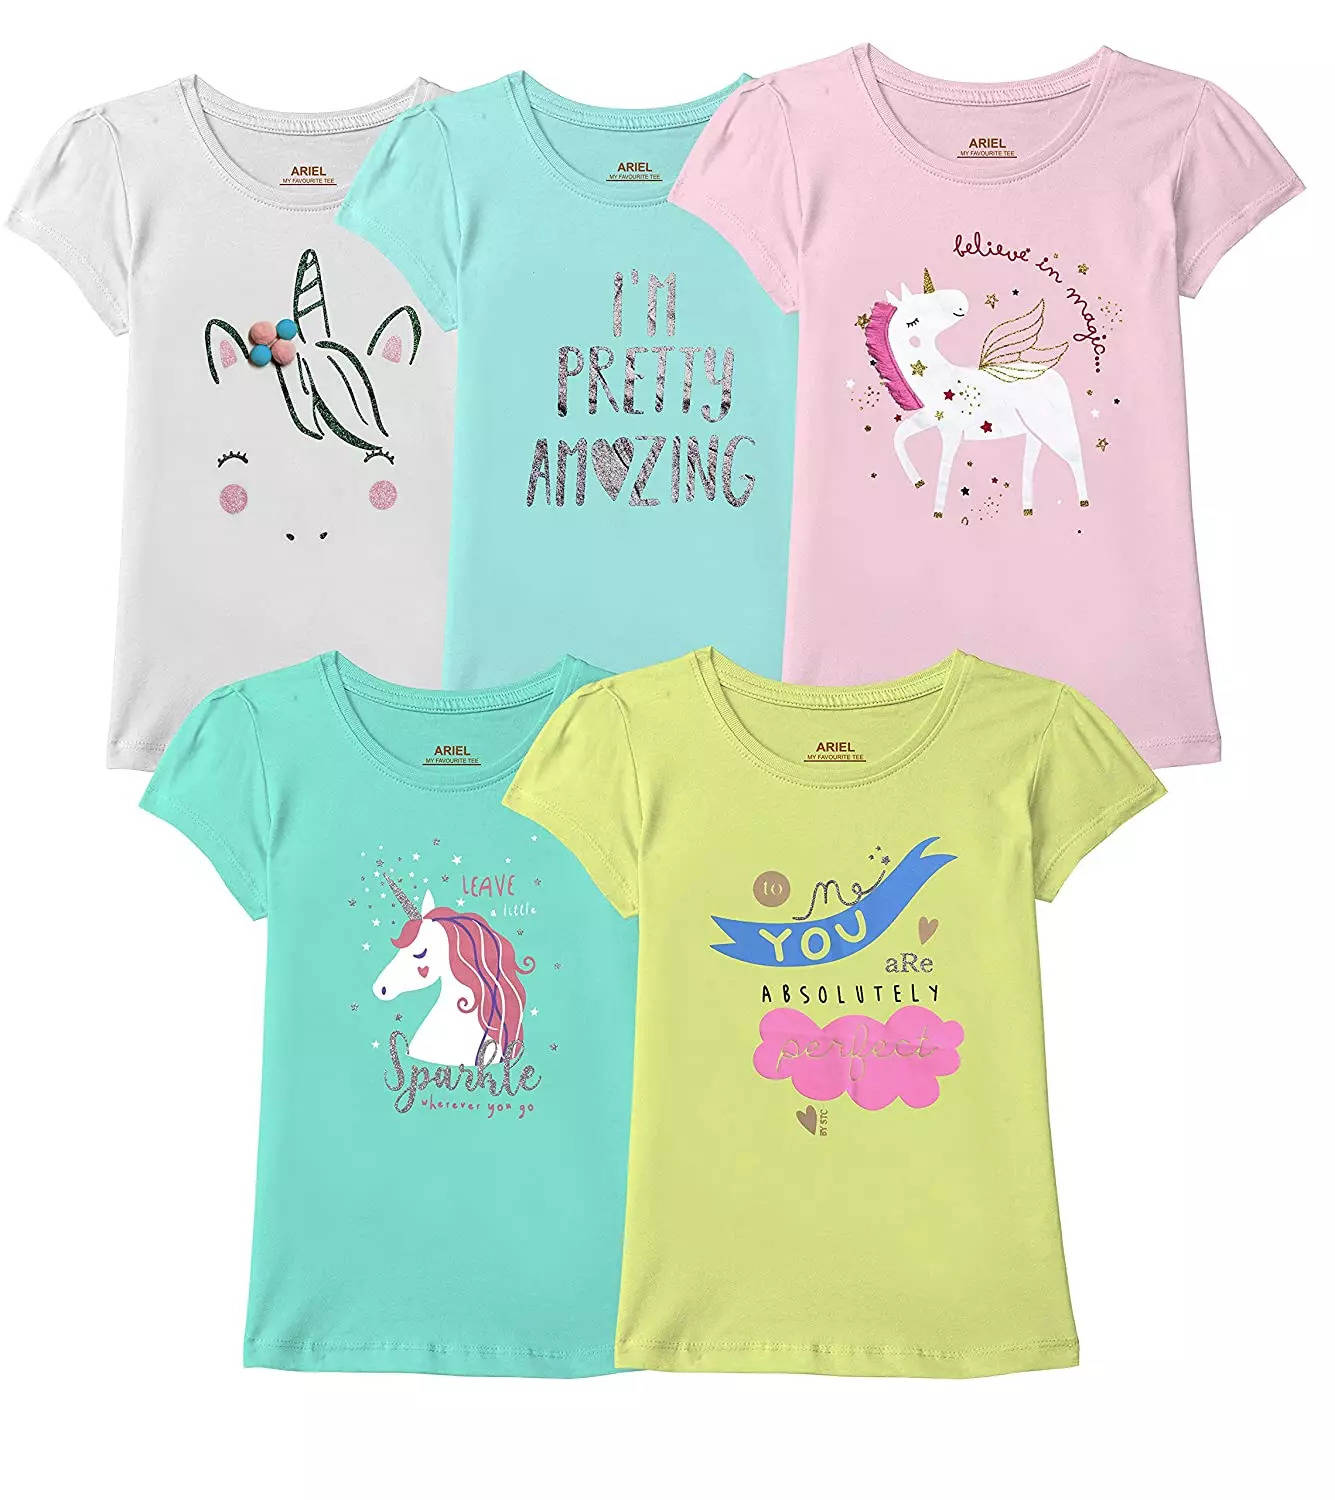 Best T Shirts for girls india - Free shipping - NO. 1 Best seller